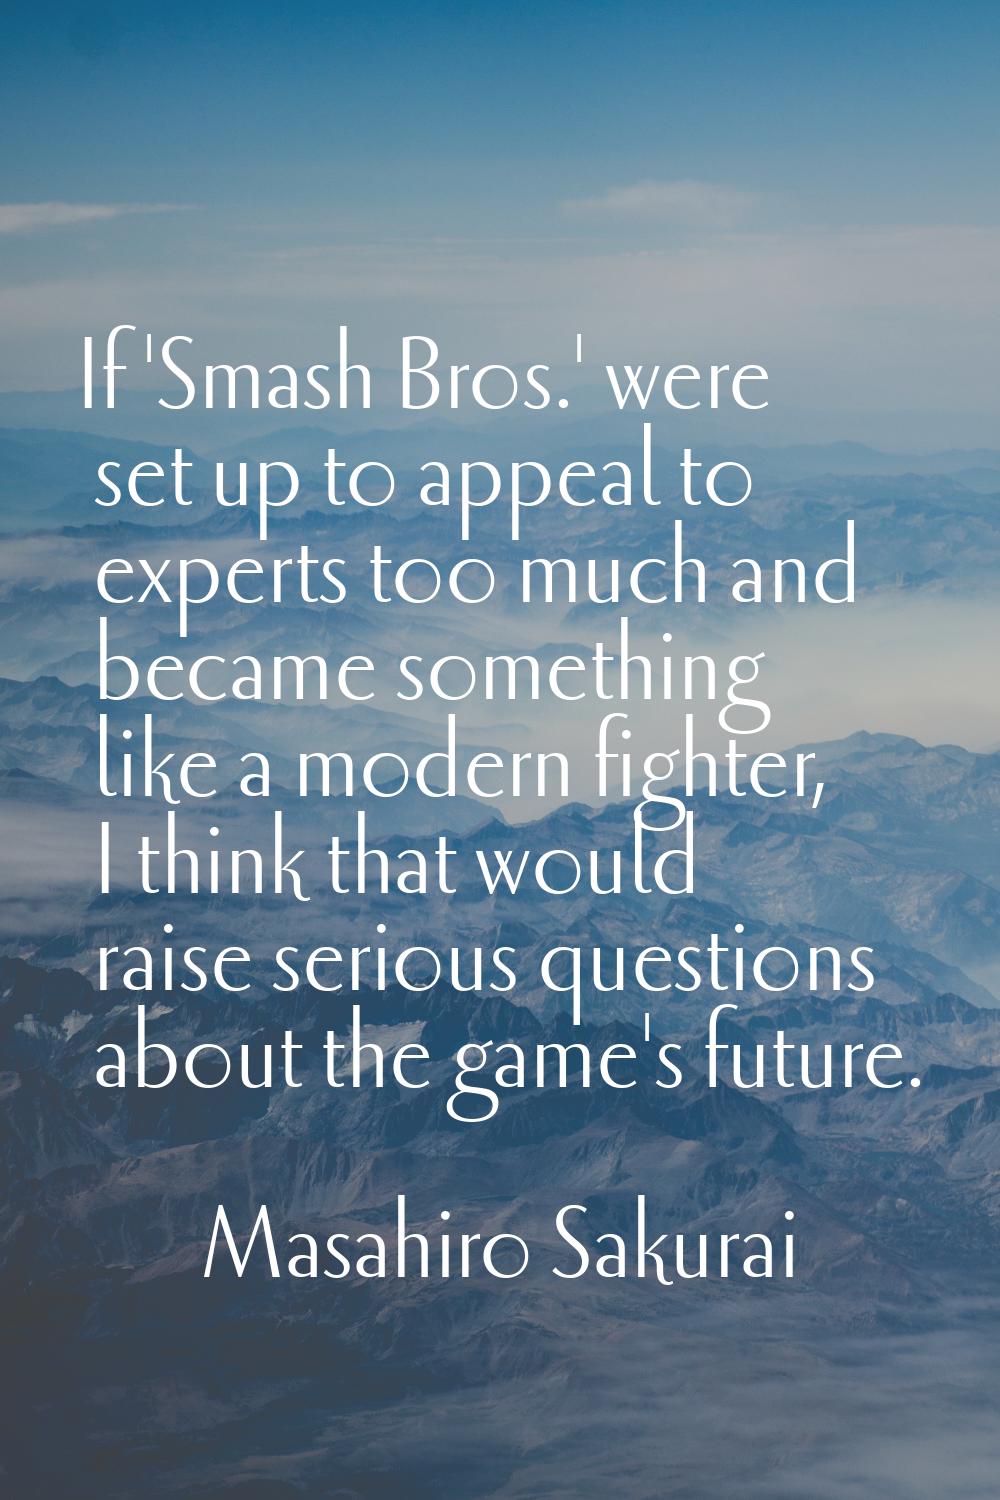 If 'Smash Bros.' were set up to appeal to experts too much and became something like a modern fight